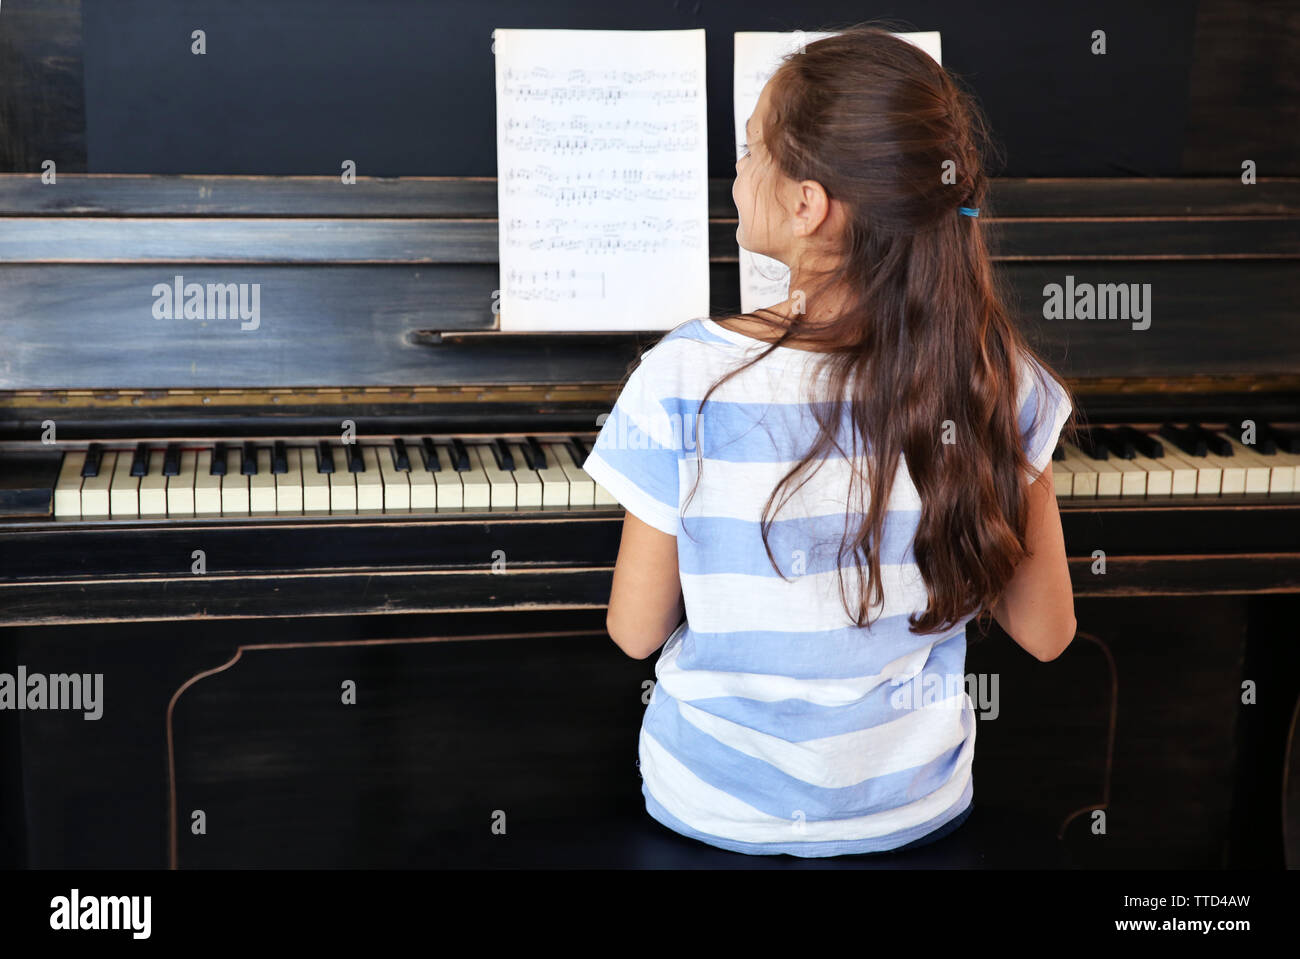 Cute little musician girl plays piano, back view Stock Photo - Alamy